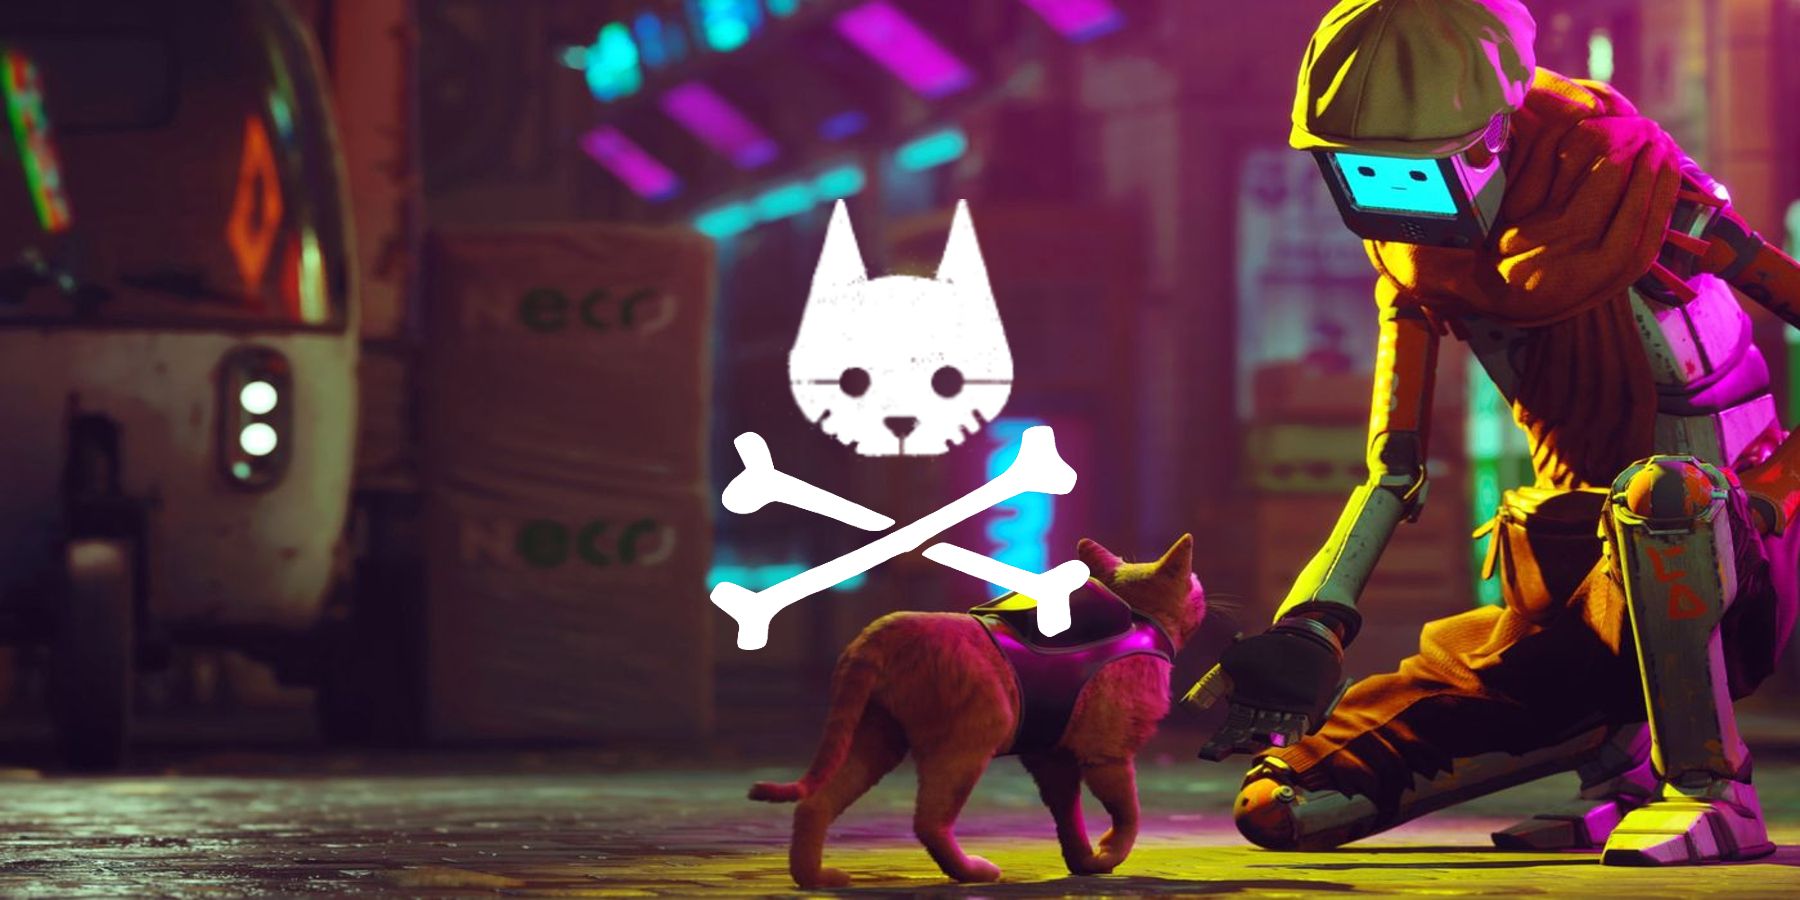 The cat from Stray approaches a robot, with a skull and crossbones overlaid